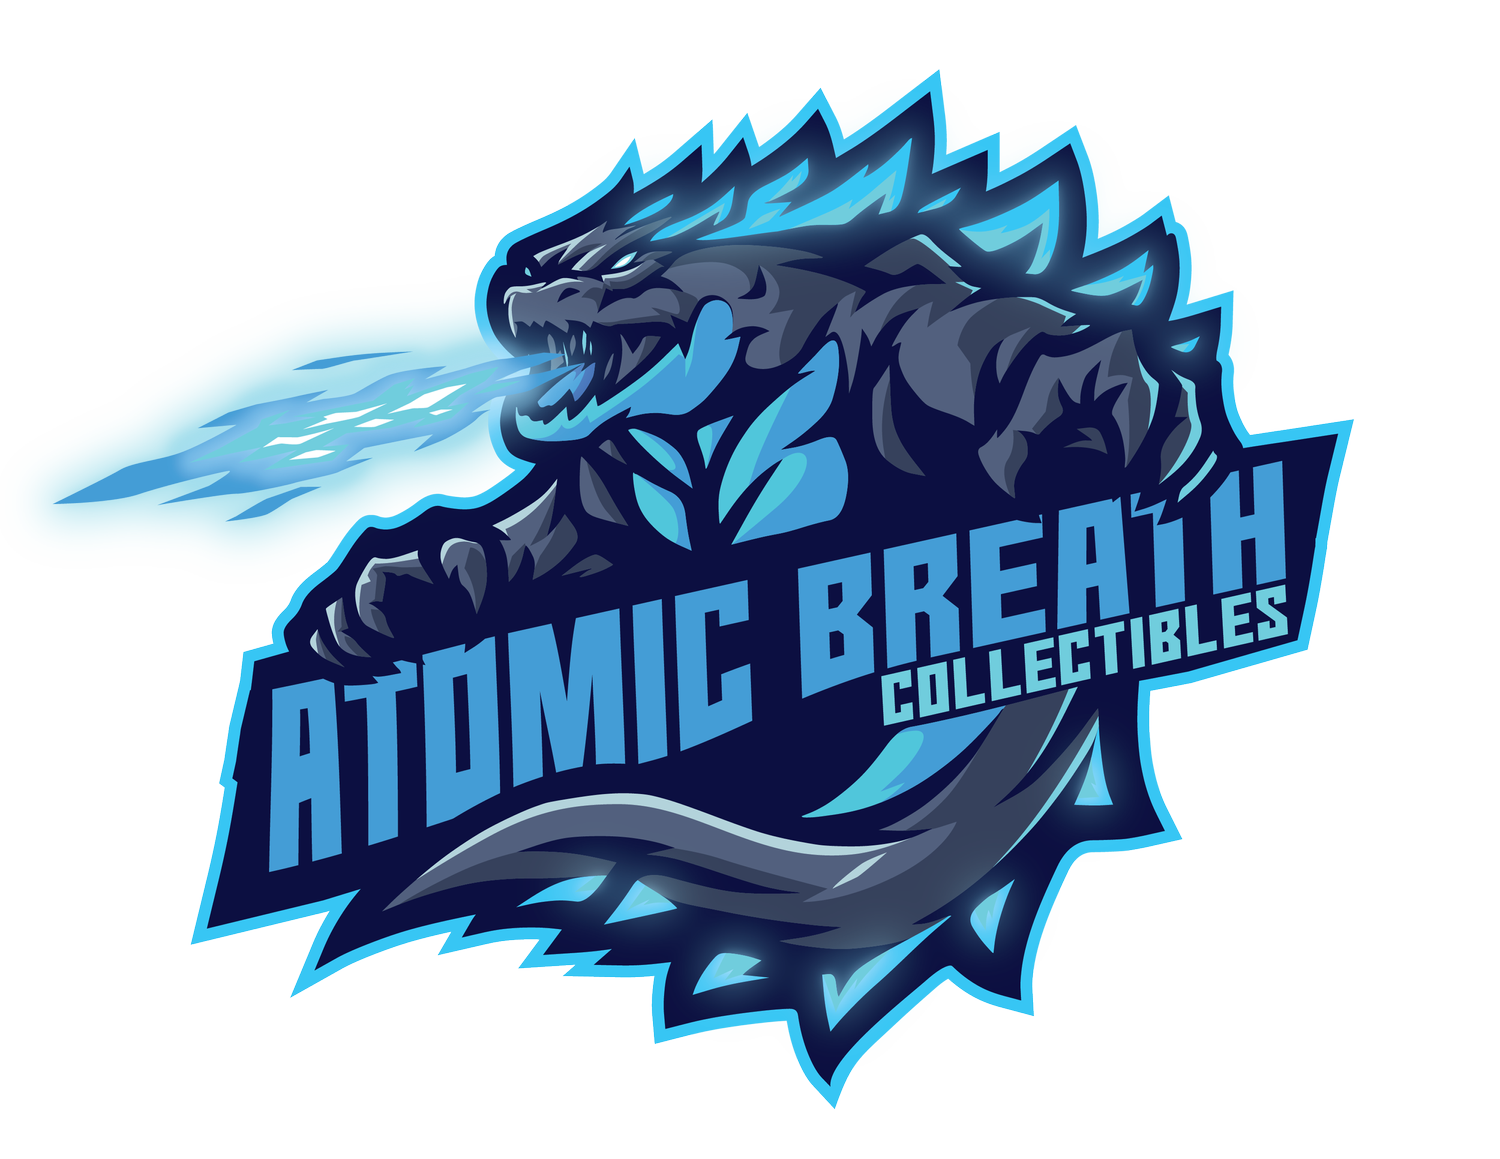 Atomic Breath Collectibles